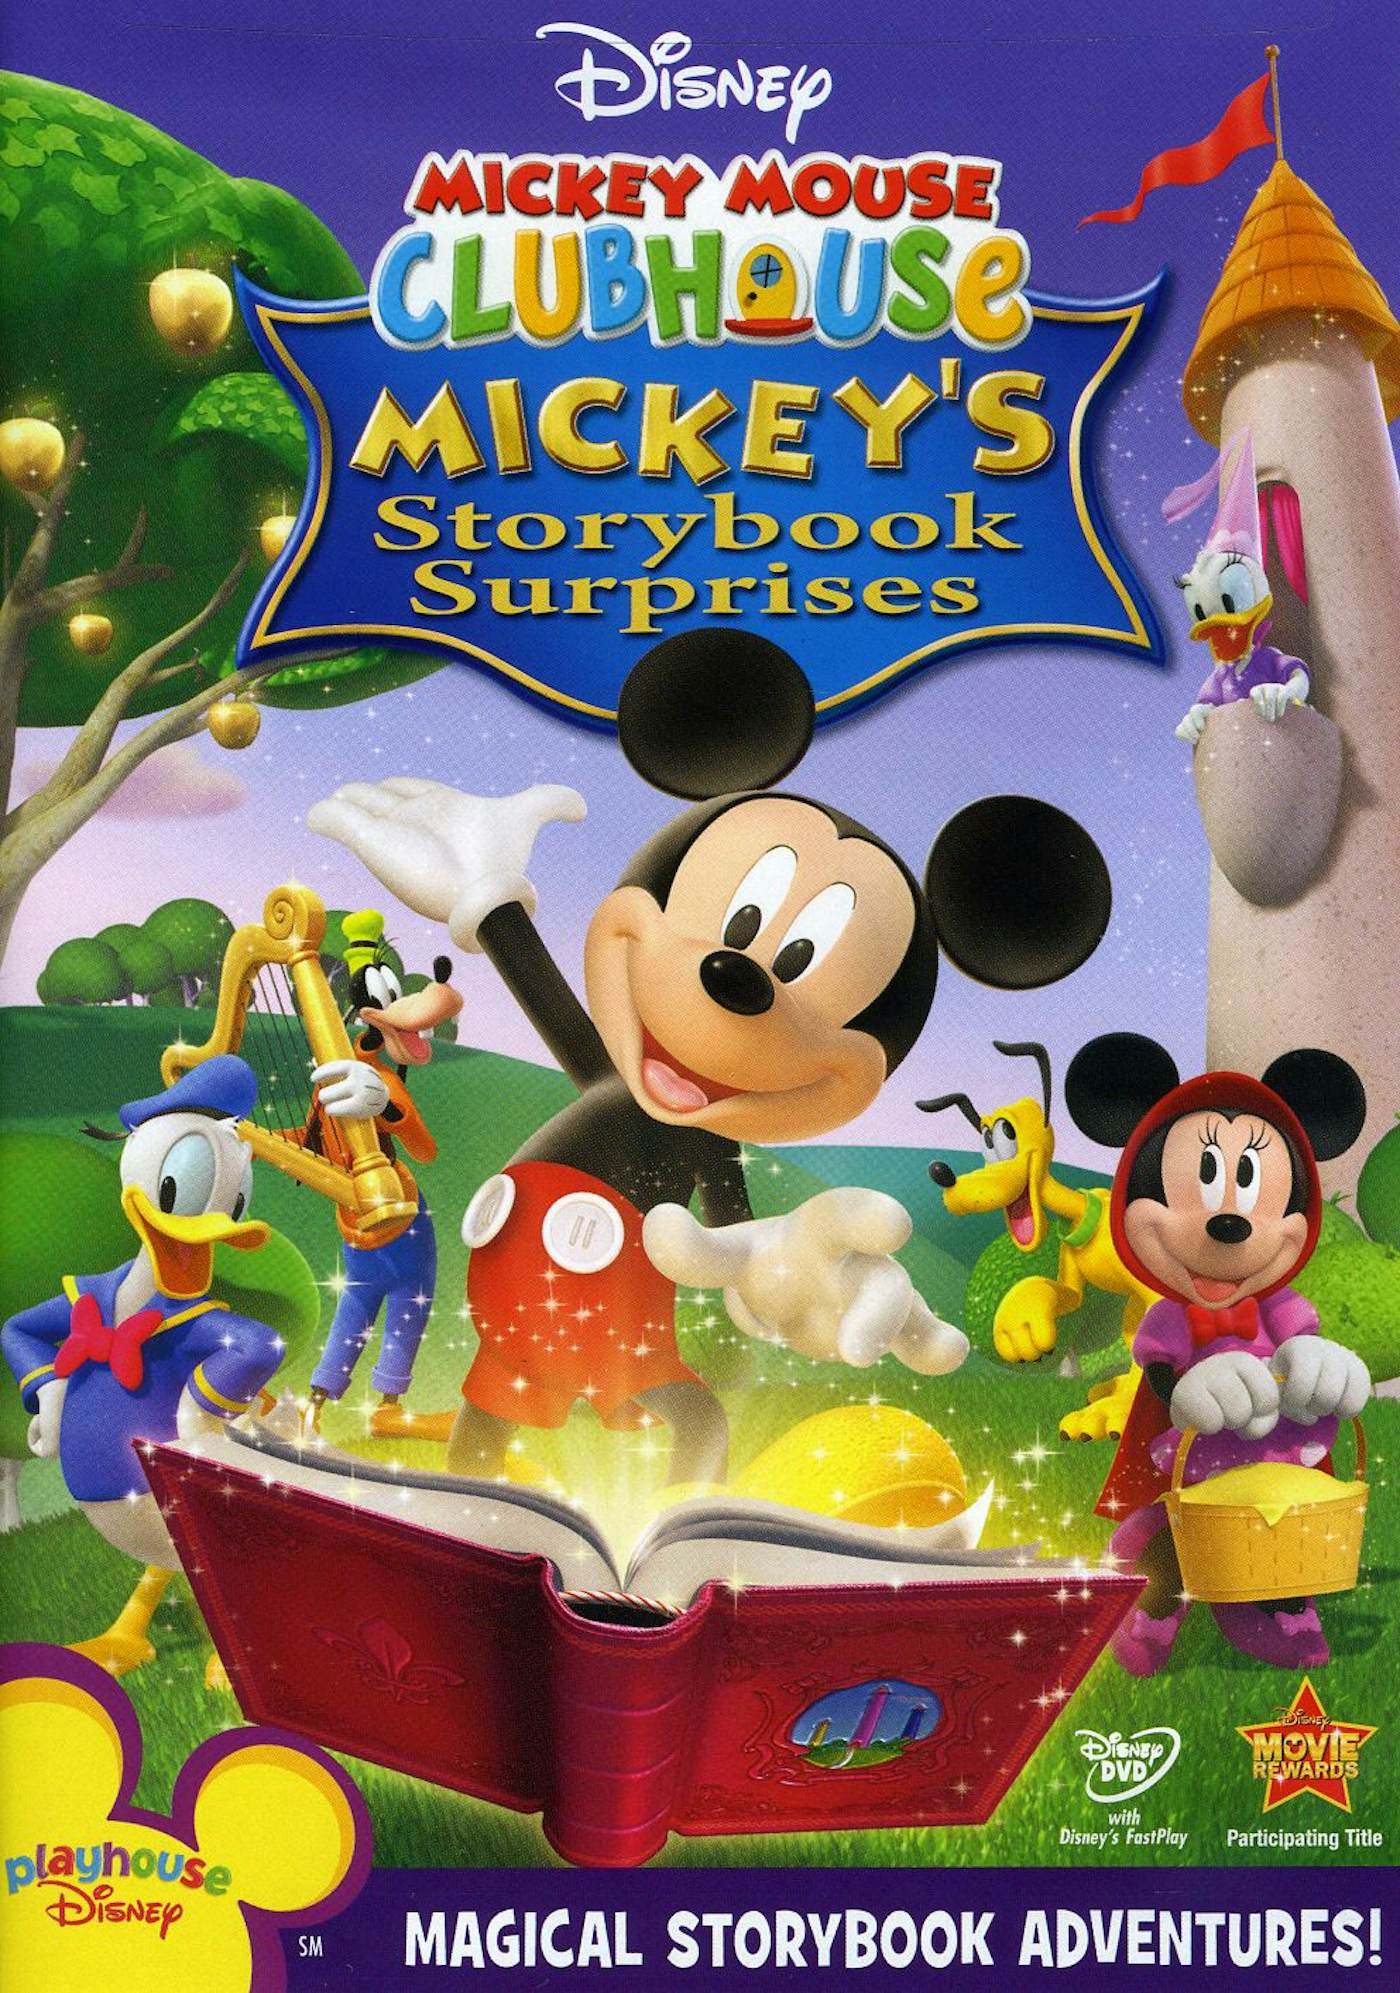 Disney's Mickey Mouse Clubhouse : Mickey's Treat [ DVD ] @